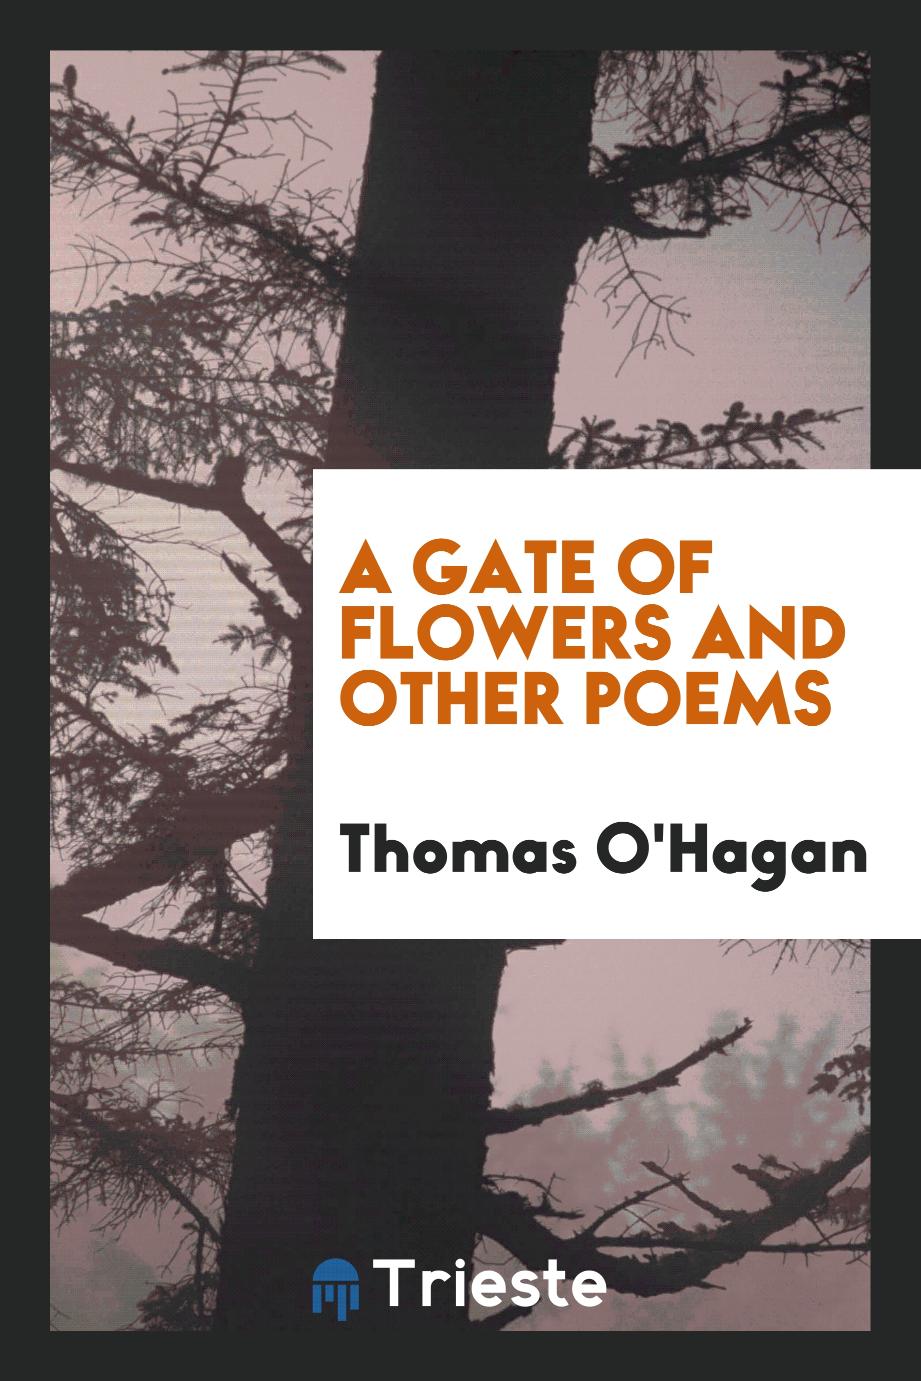 A gate of flowers and other poems